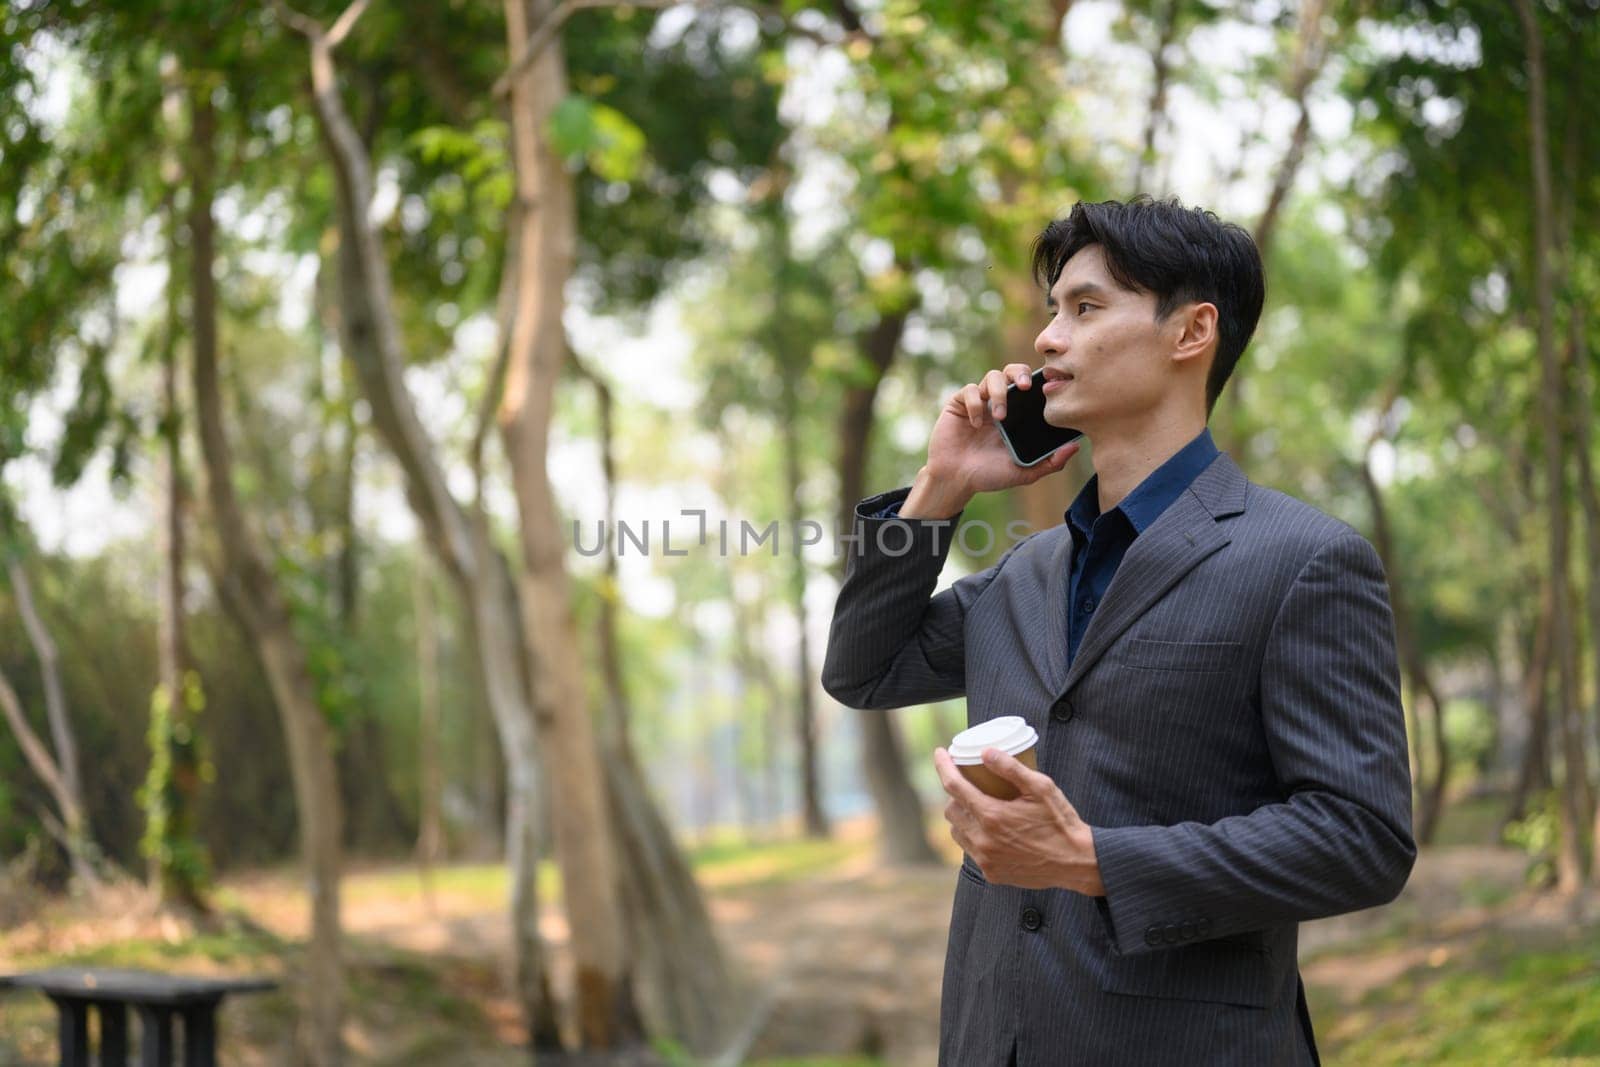 Handsome young businessman talking on mobile phone while standing at urban park.